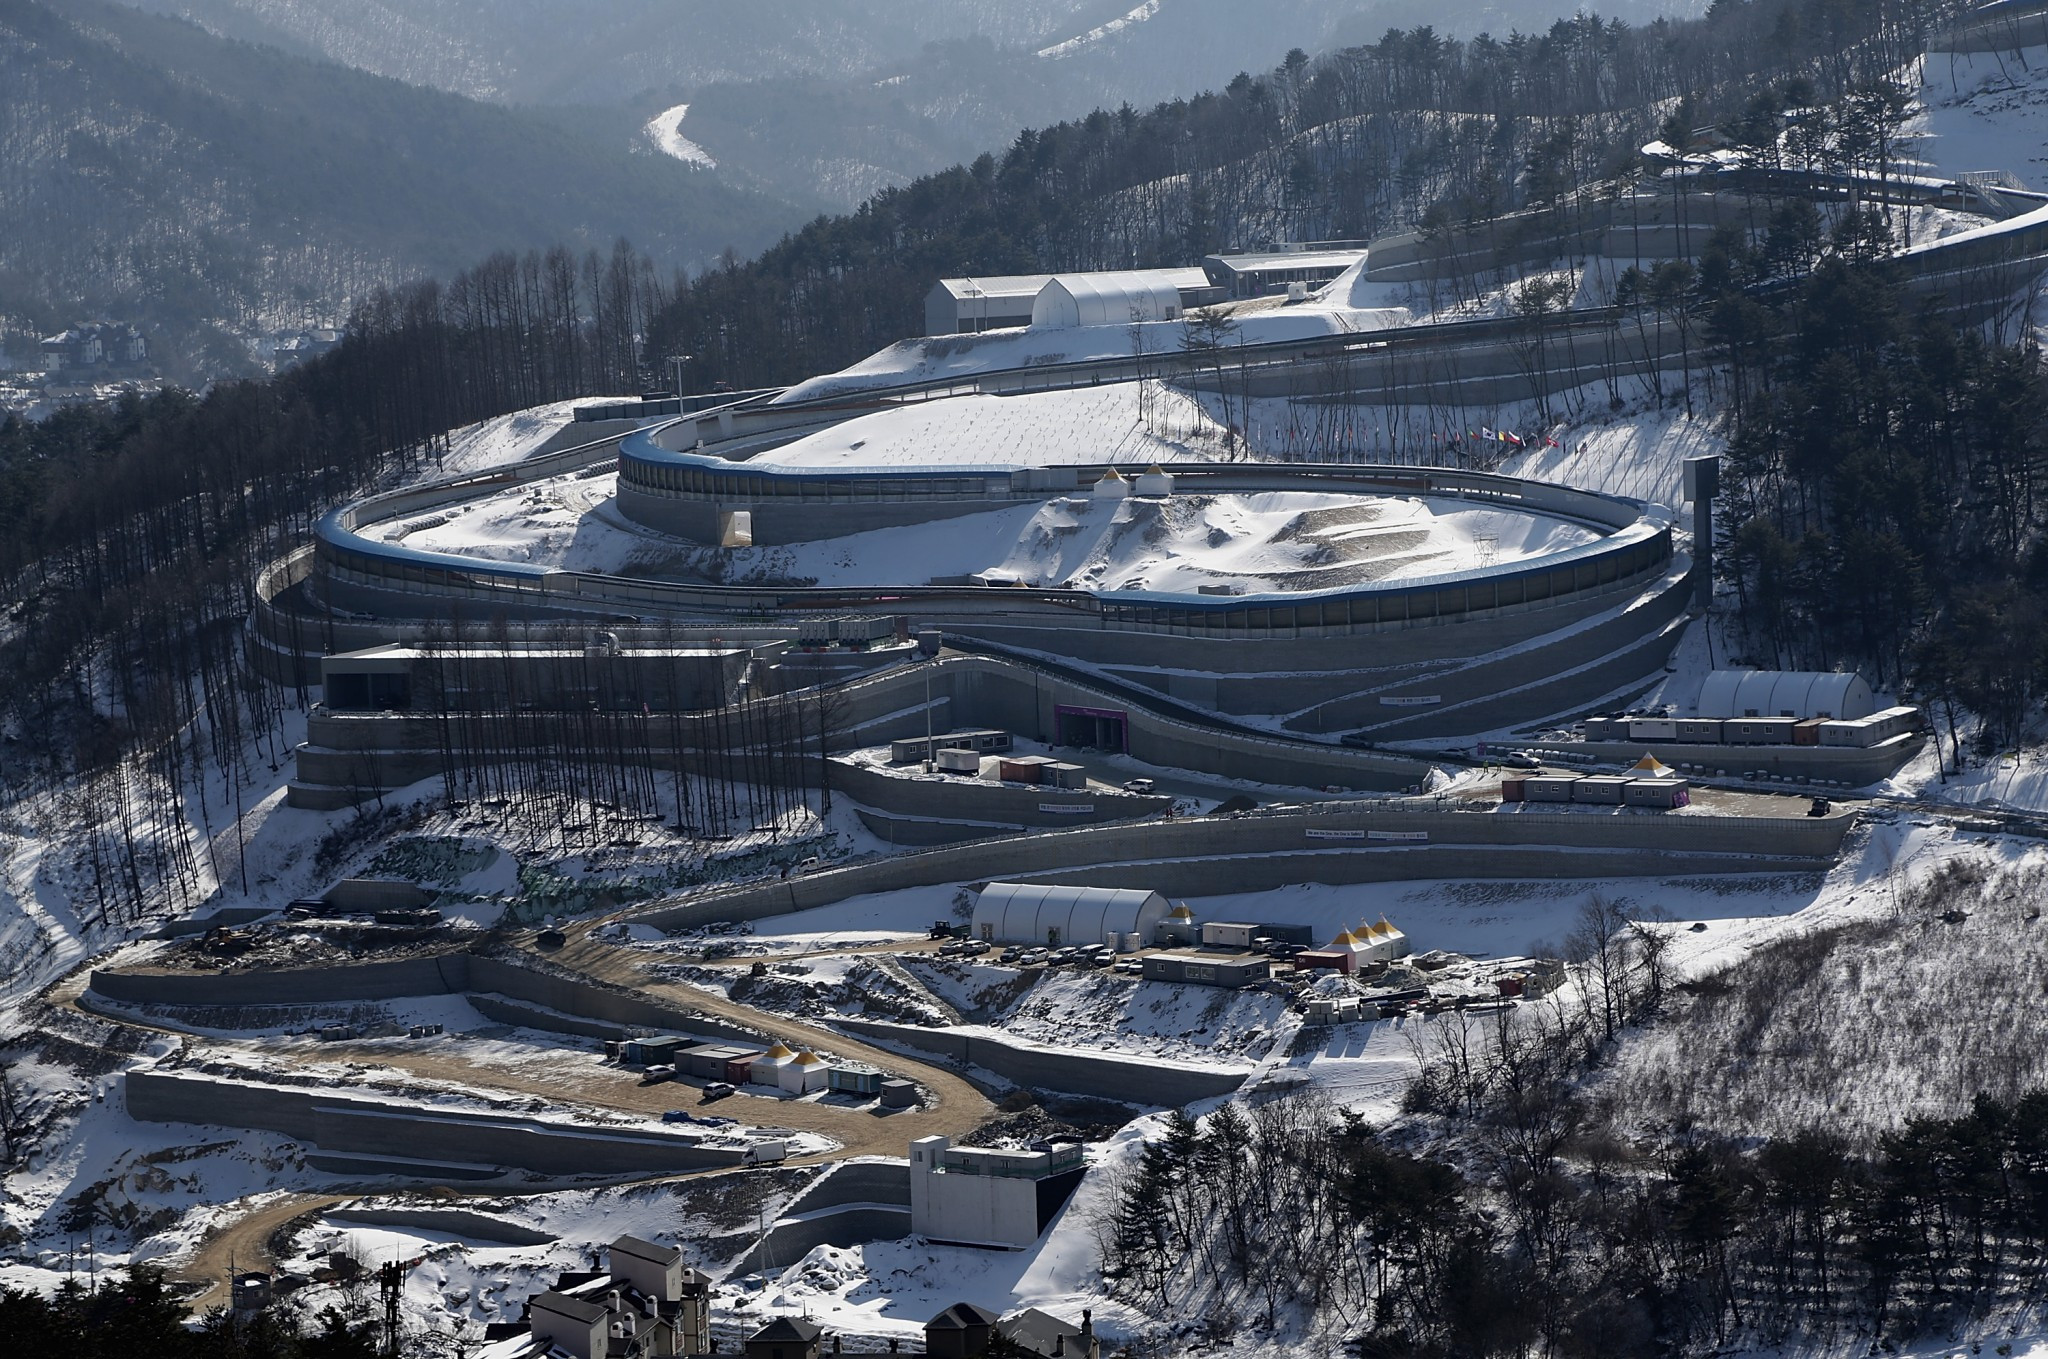 The Alpensia Sliding Centre will host bobsleigh, skeleton and luge competition during Pyeongchang 2018 ©Getty Images